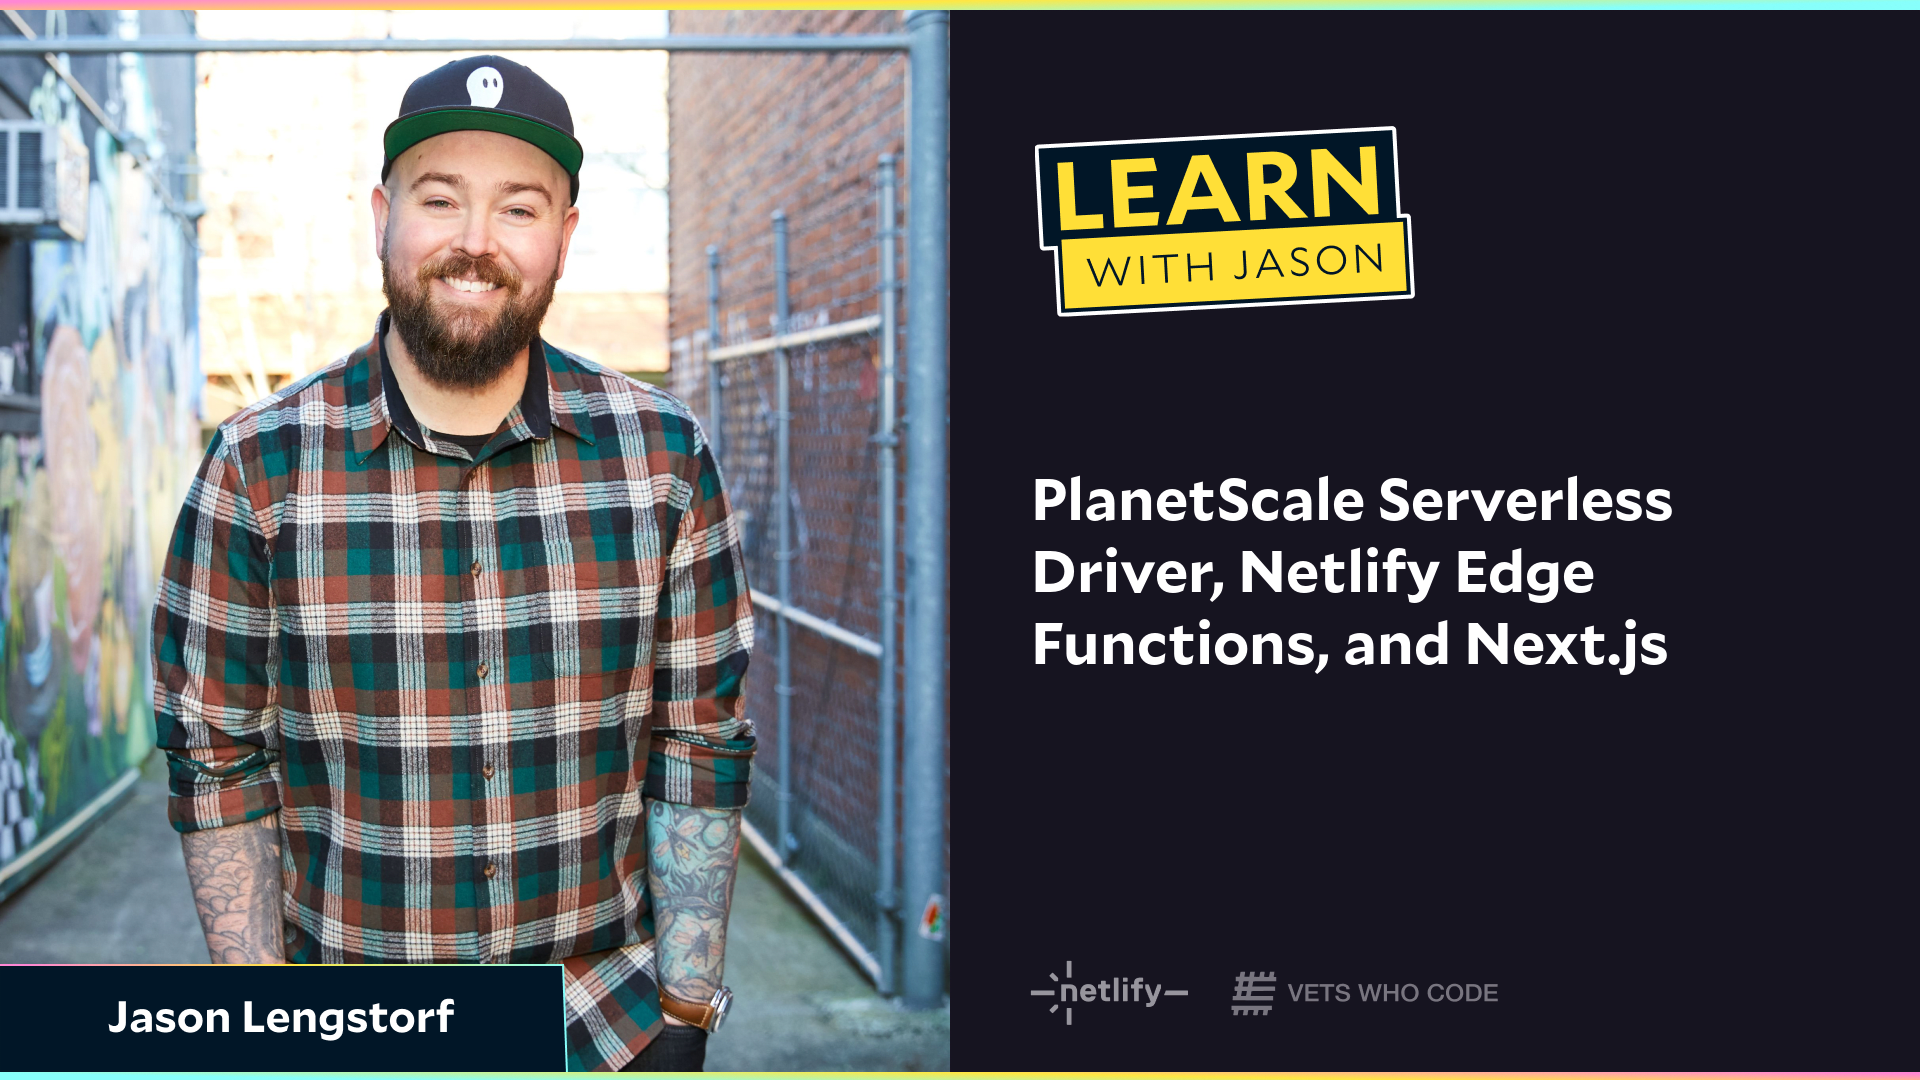 PlanetScale Serverless Driver, Netlify Edge Functions, and Next.js  (with Jason Lengstorf)